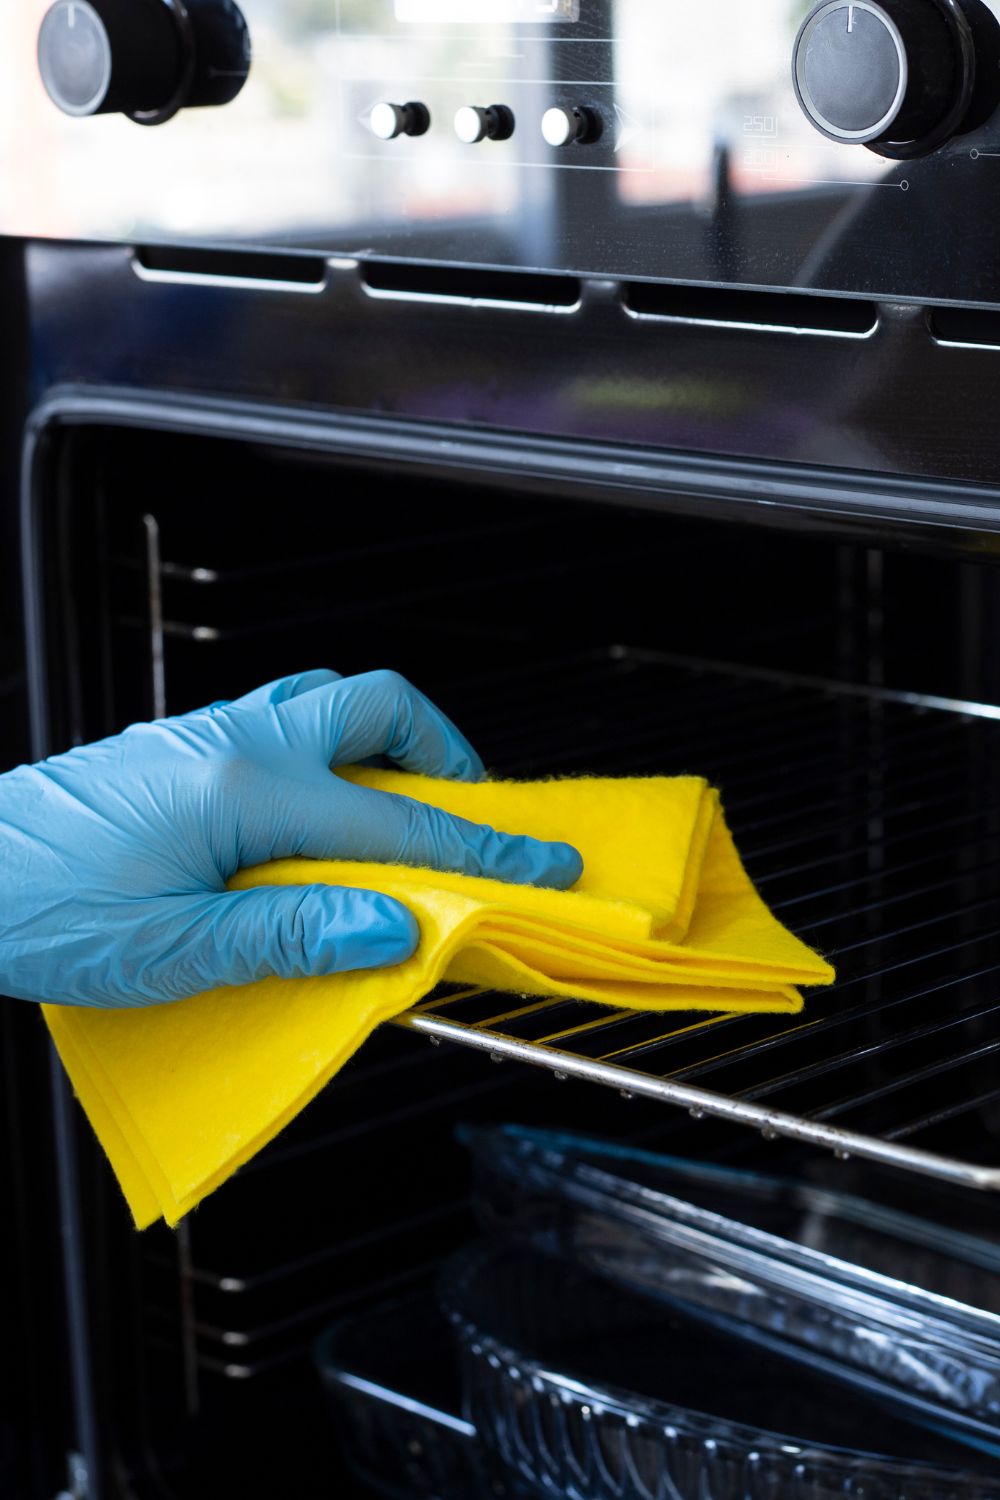 Kitchen Cleaning Service in Houston, TX